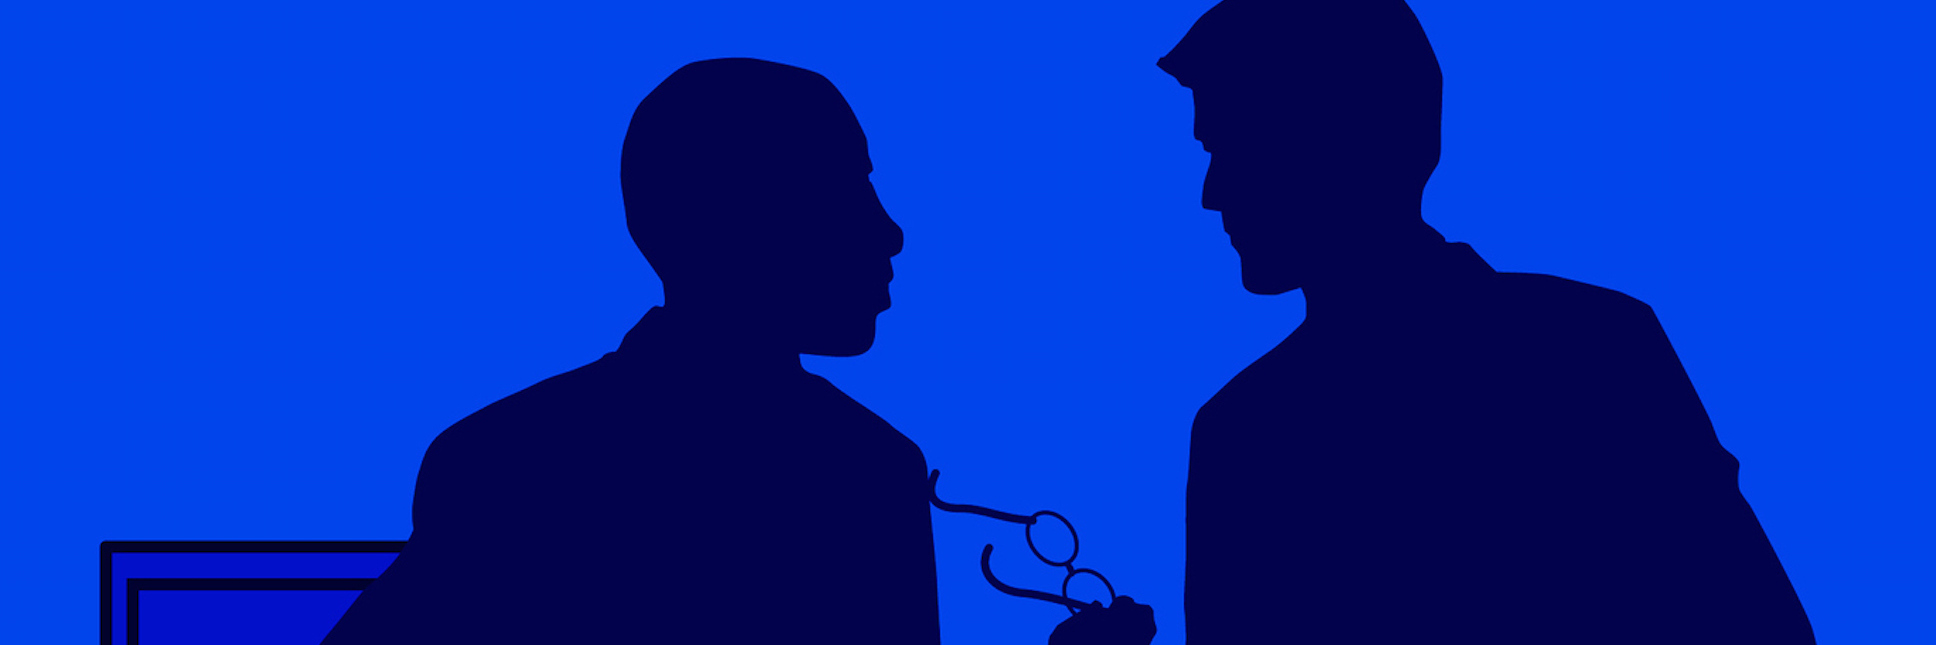 Silhouettes of two male figures talking, with one person holding a pair of glasses